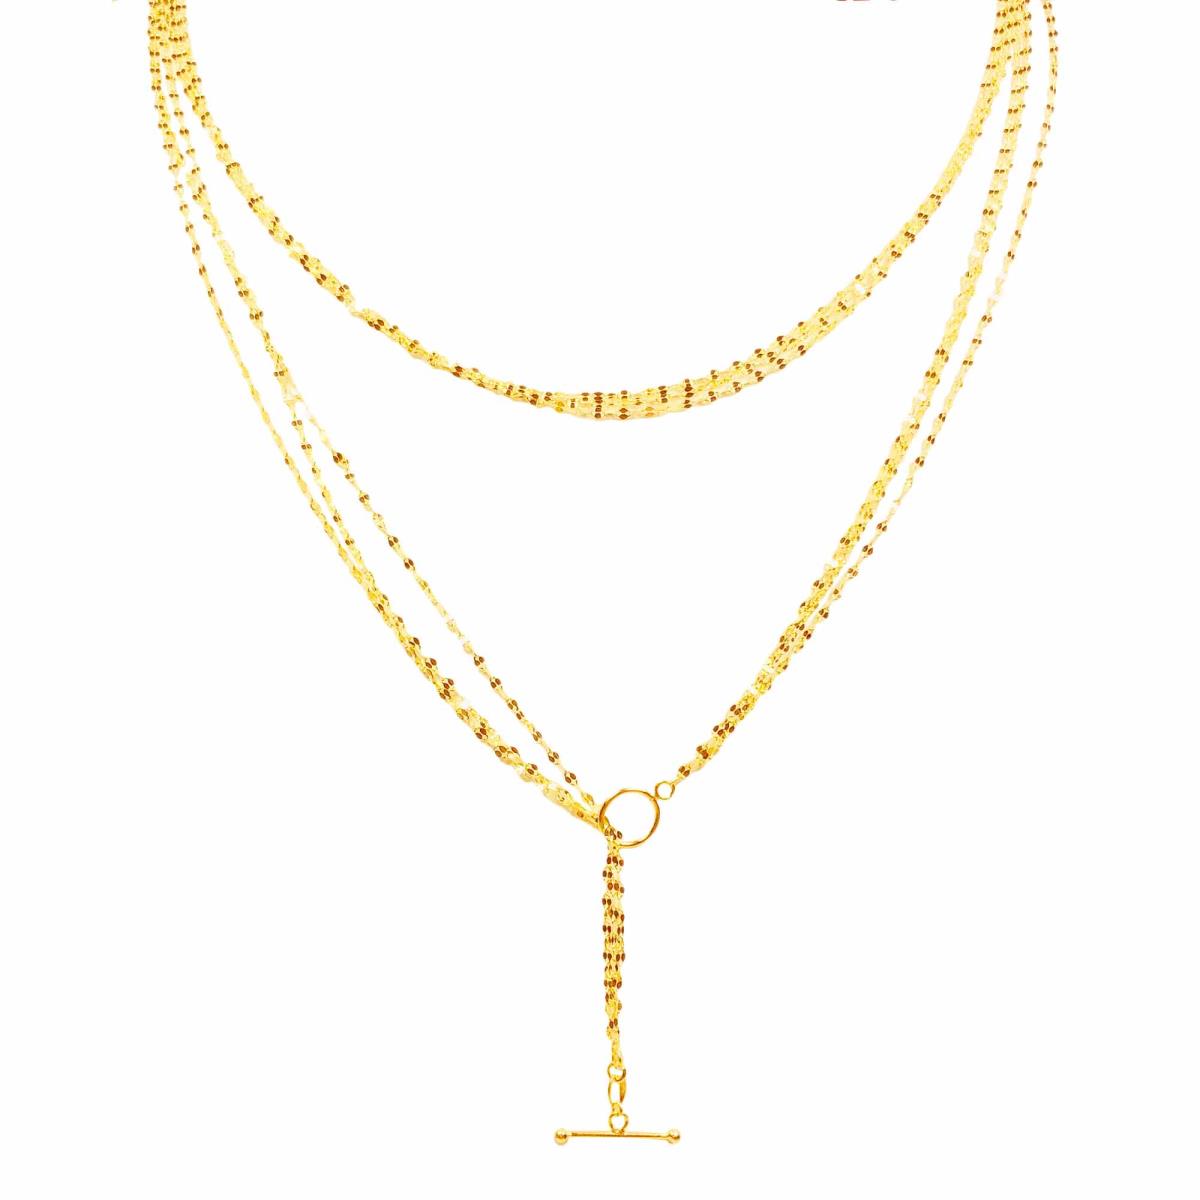 10K Yellow Gold DC Twist Multi Layer 36" Necklace